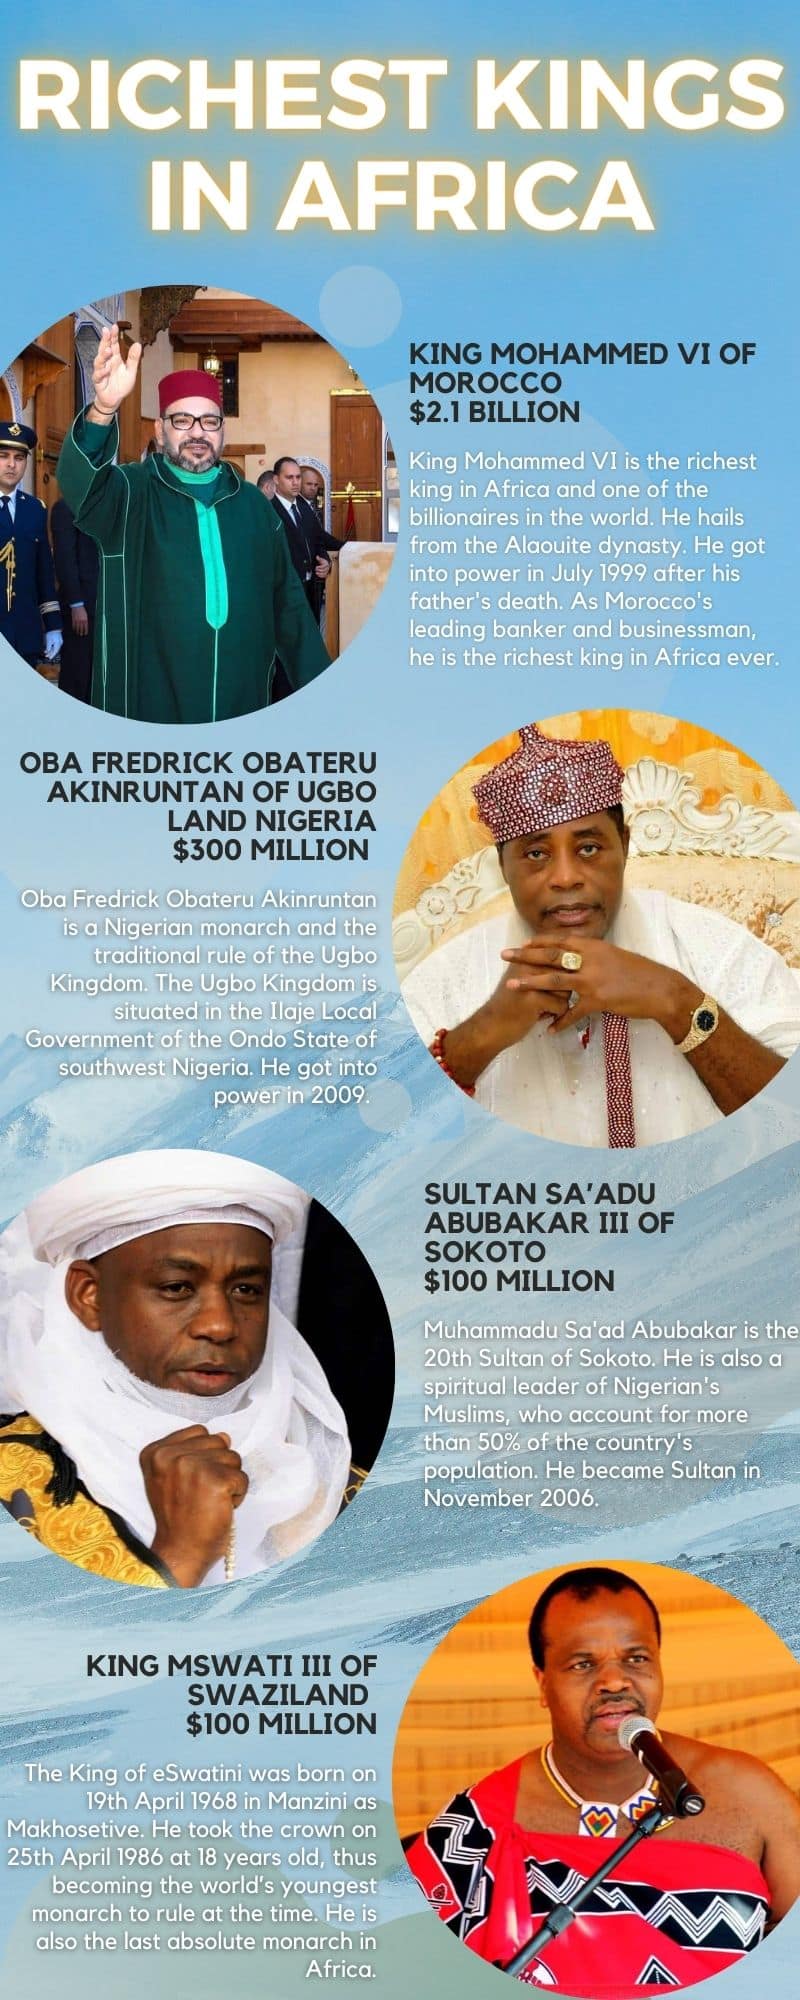 Richest kings in Africa